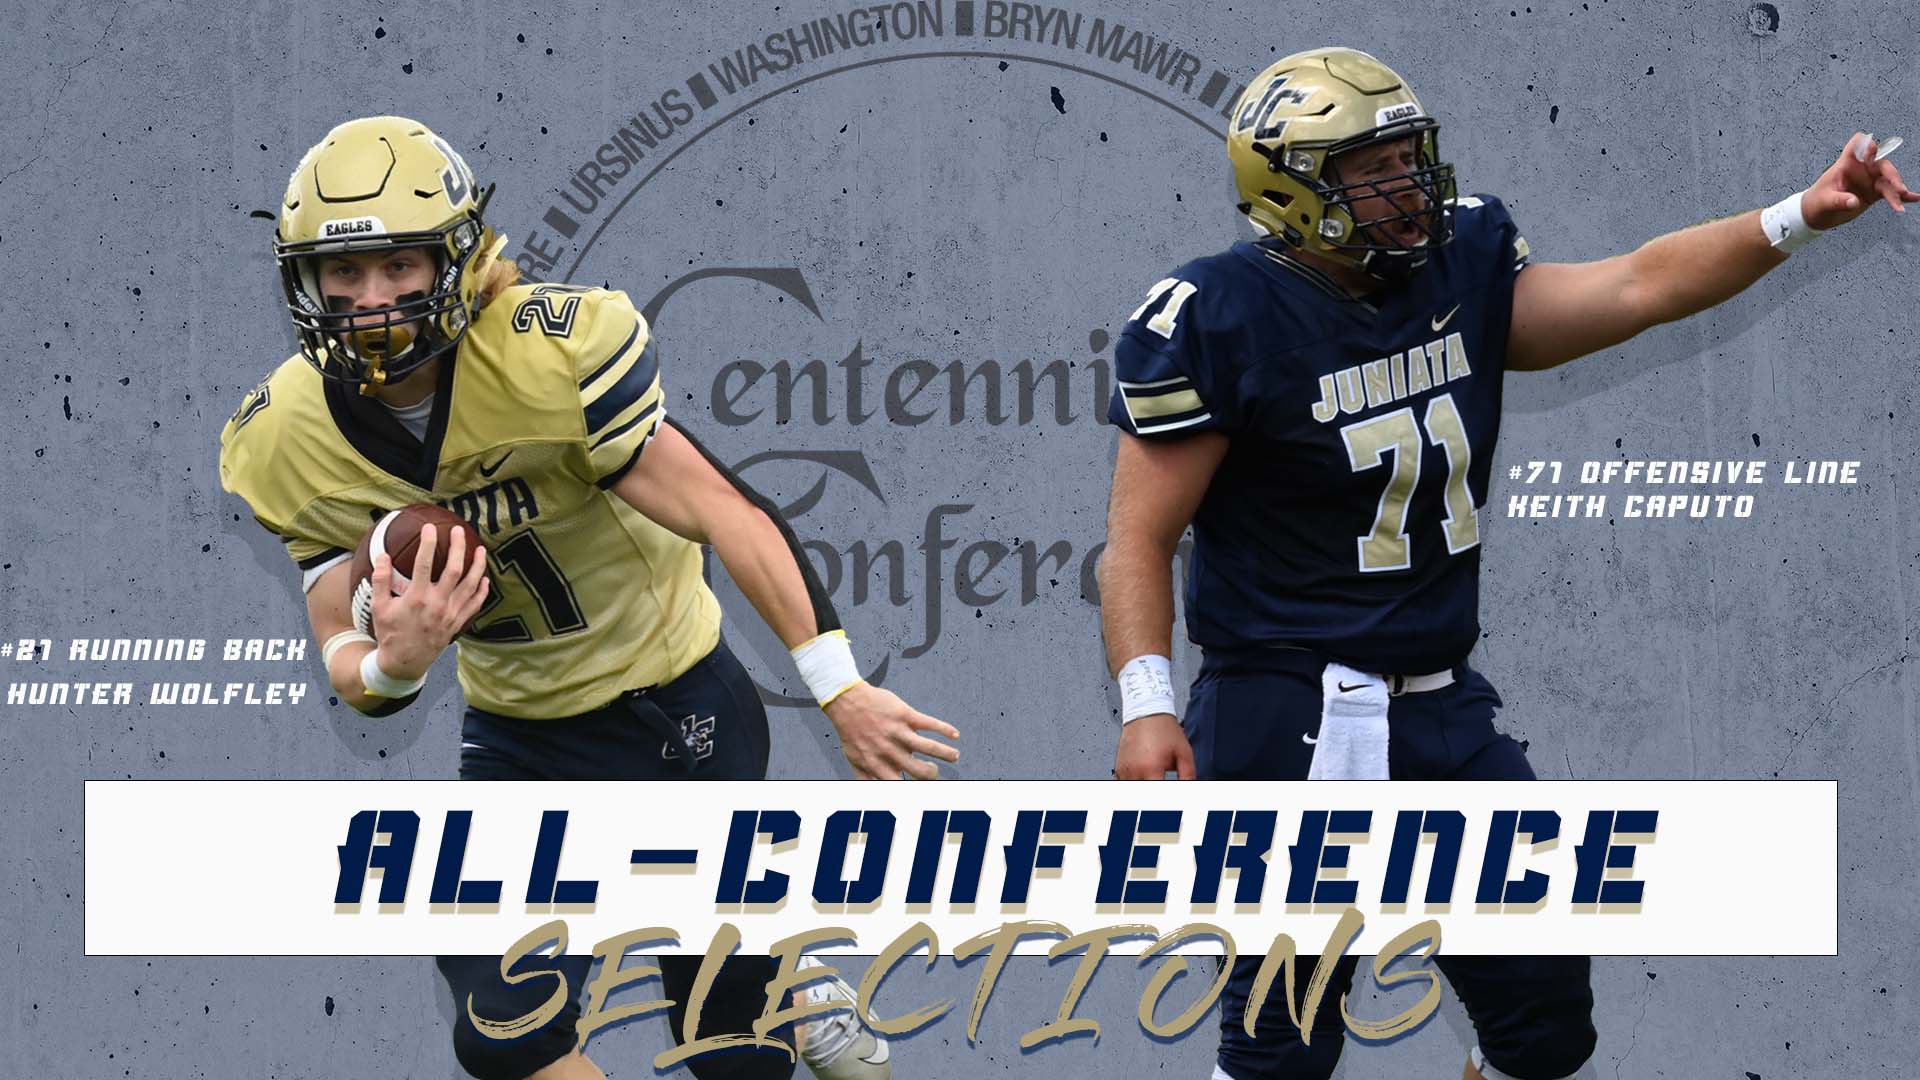 Caputo, Wolfley Named to Centennial All-Conference Team